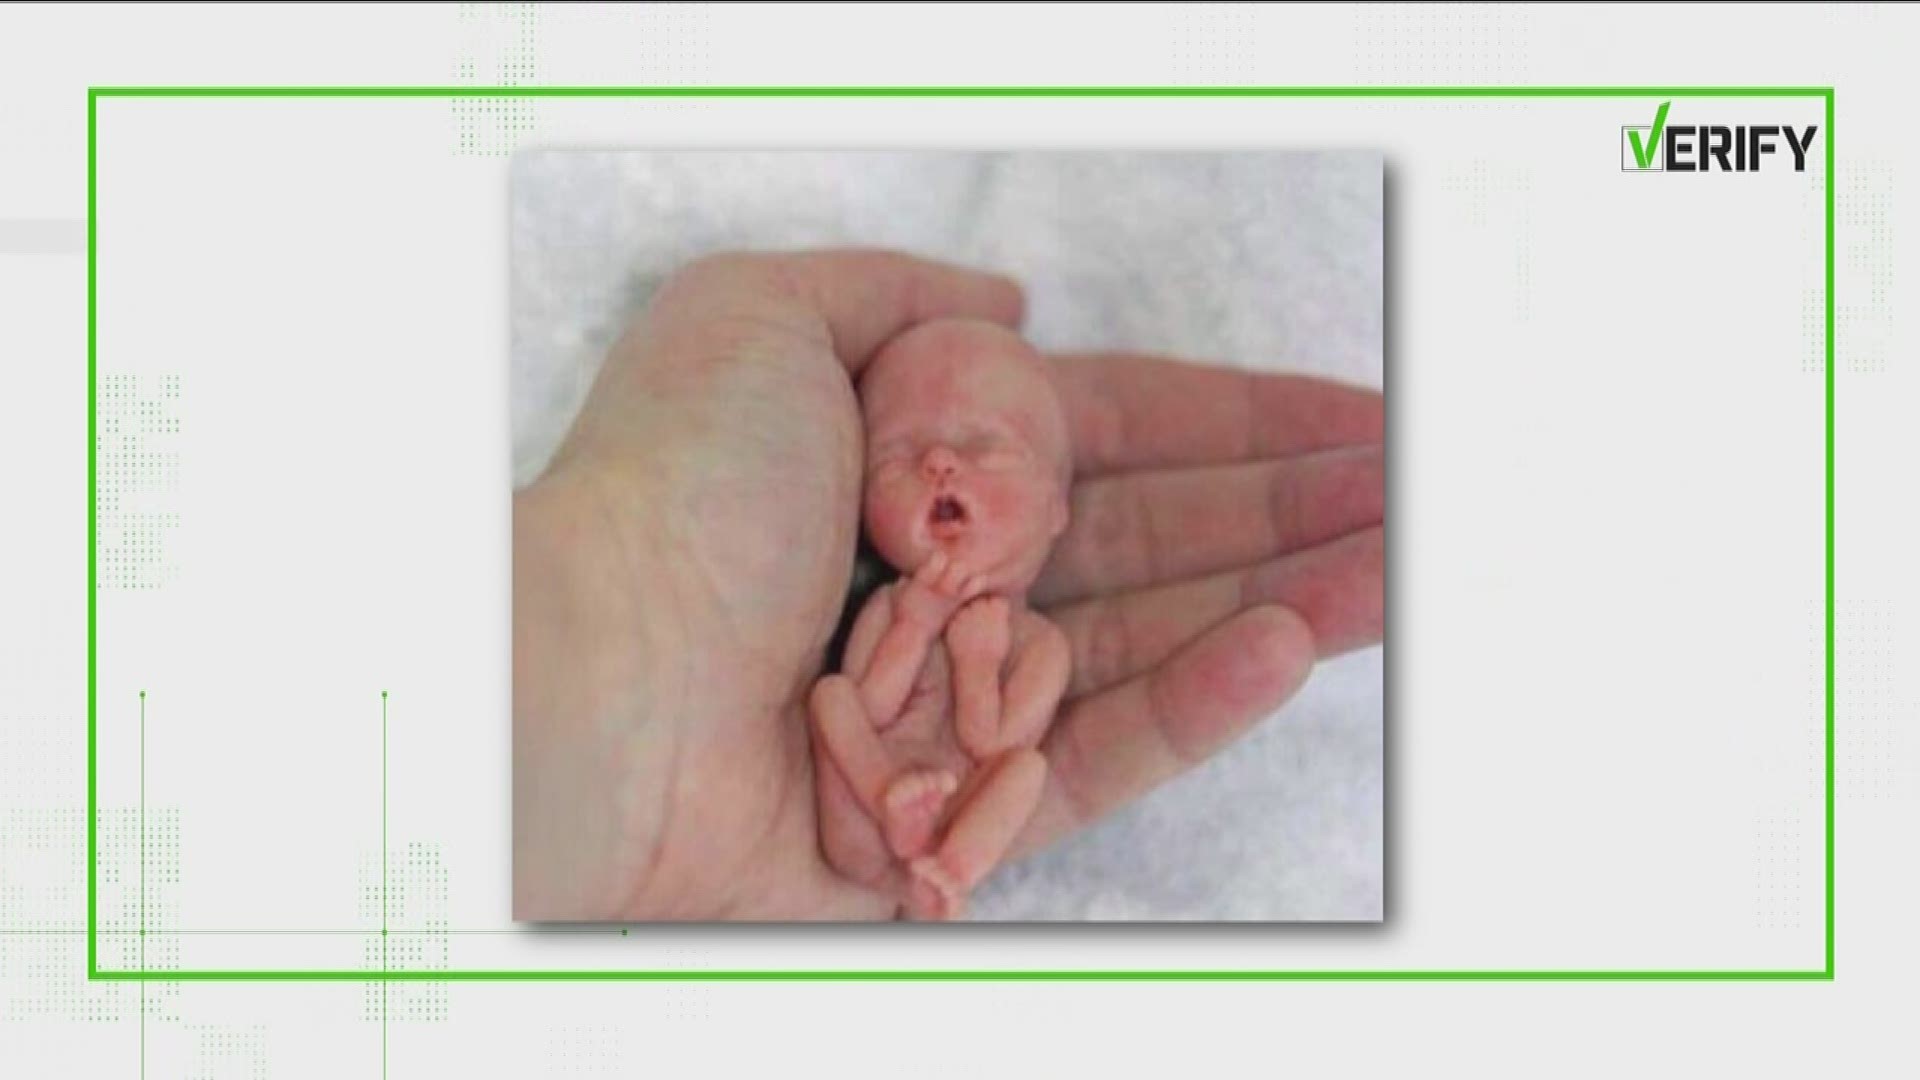 An image of a 12-week-old fetus outside the womb is making the rounds on the internet, but is it real? Chris Rogers verifies.